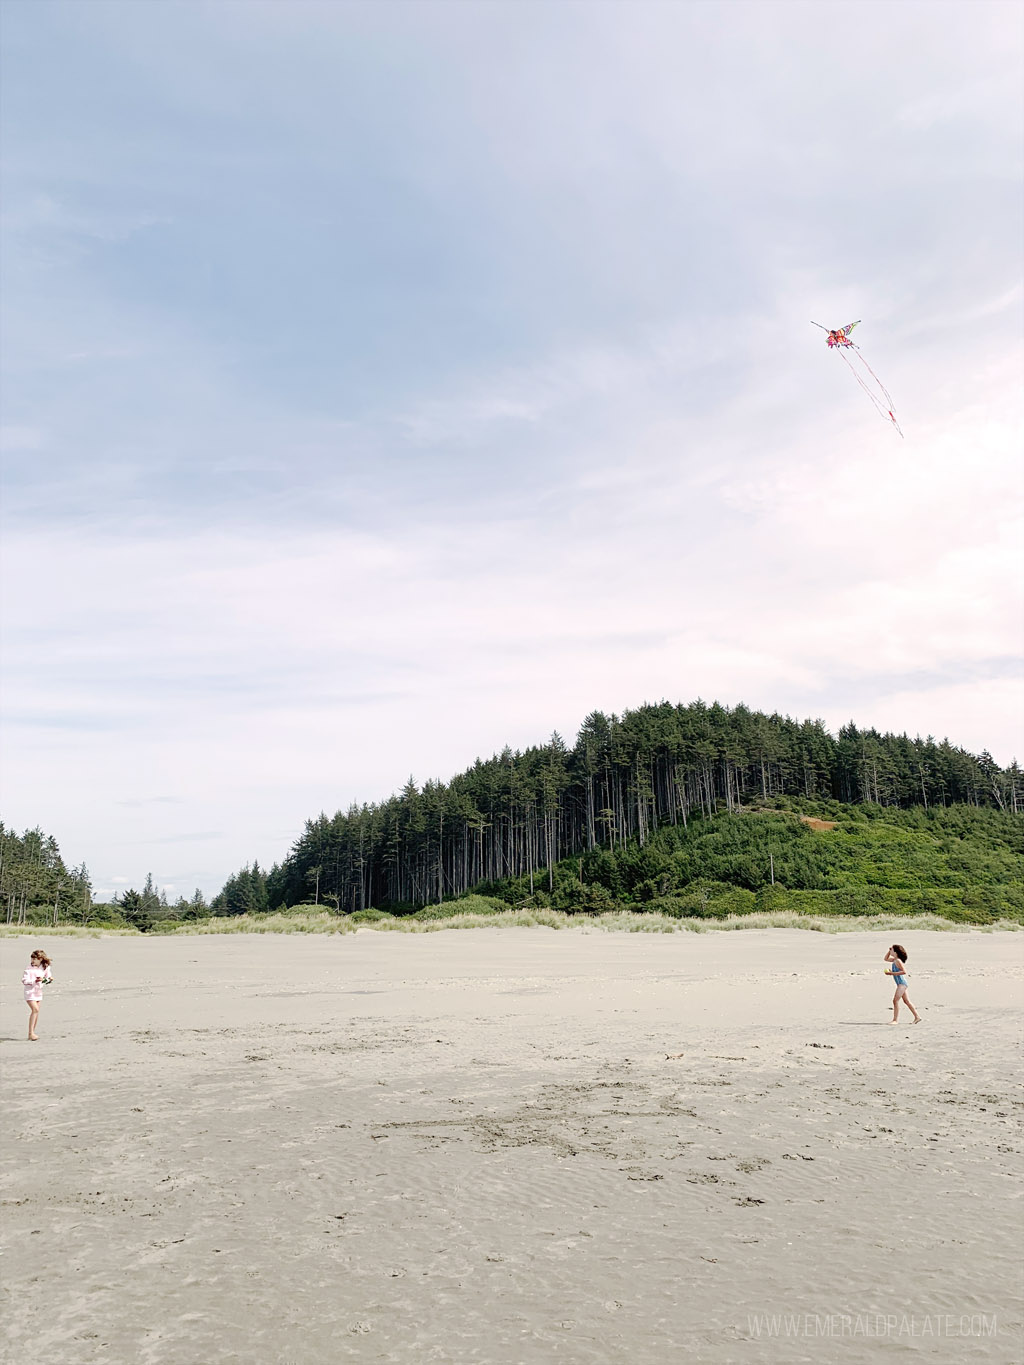 kids playing with a kite on the beach, one of the best things to do in Seabrook, WA